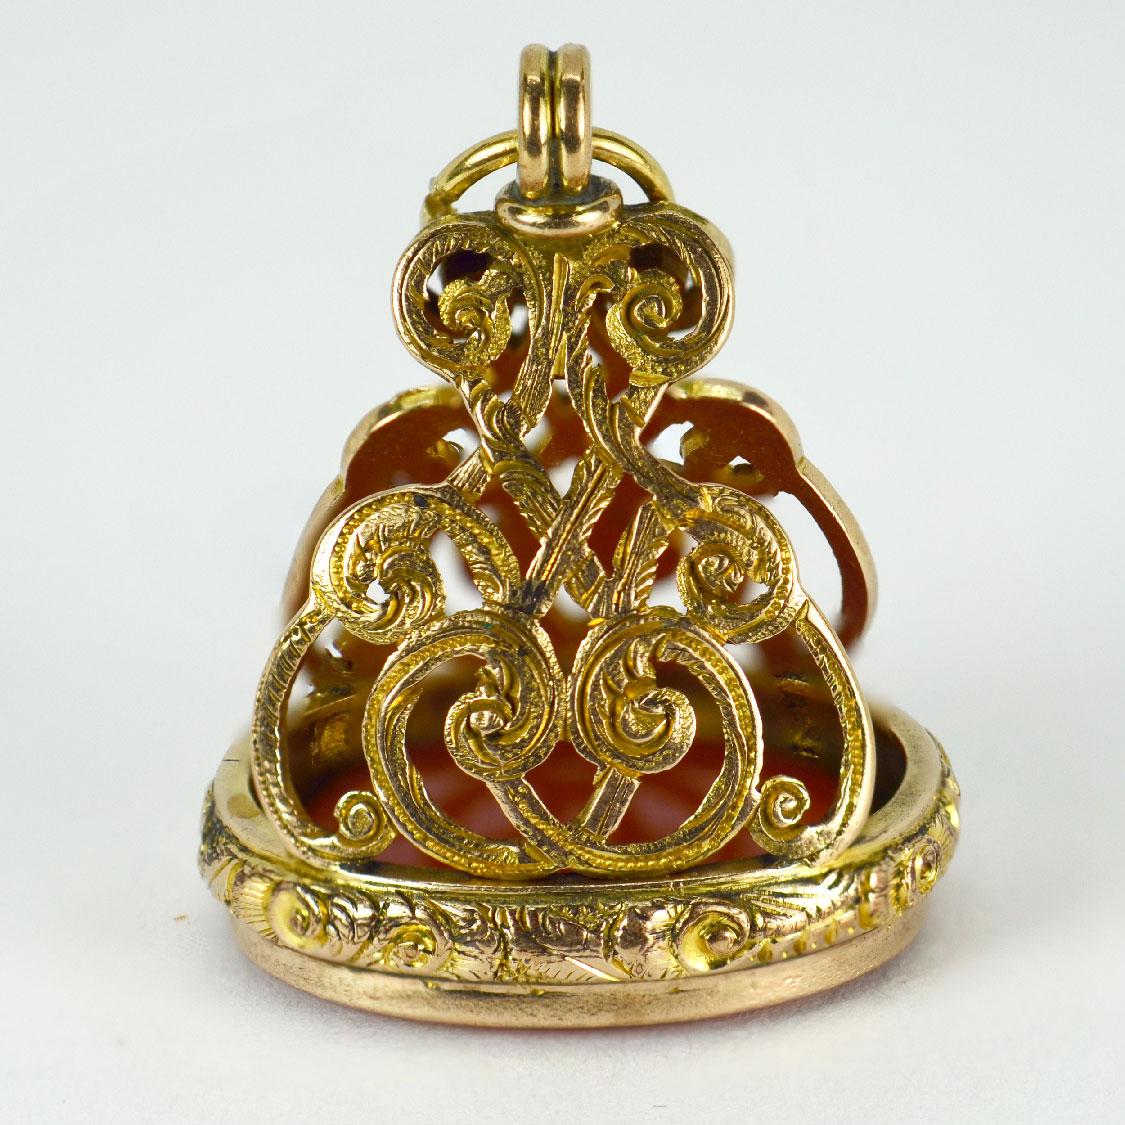 A large yellow gold charm pendant designed as a blank carnelian fob. Hallmarked for 9 karat gold, Birmingham, 1898.

Dimensions: 3.5 x 2.8 x 2.4 cm (not including jump ring)
Weight: 12.27 grams 

